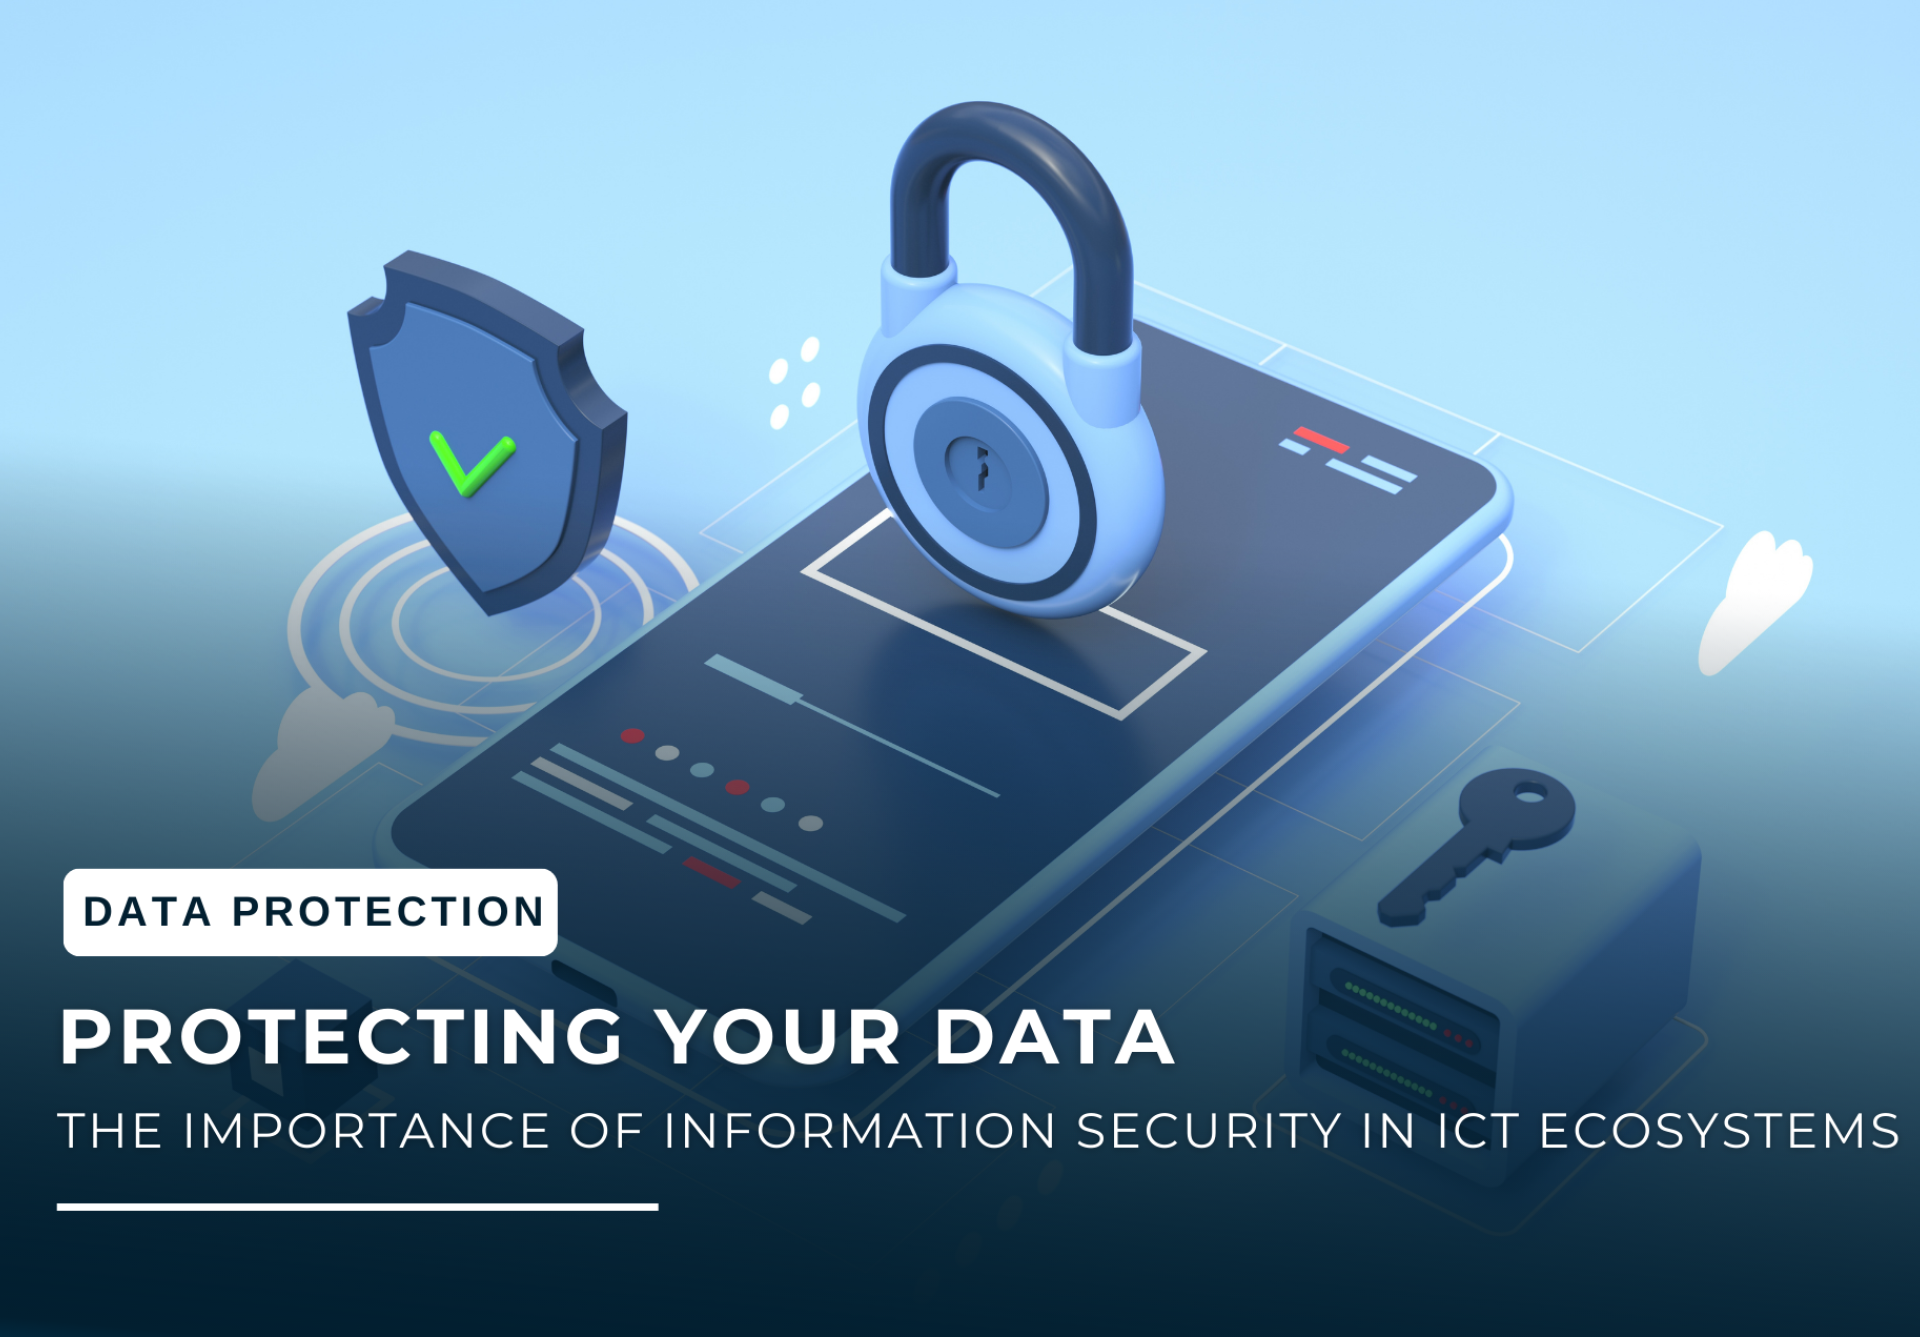 Protecting Your Data: The Importance of Information Security in ICT Ecosystems